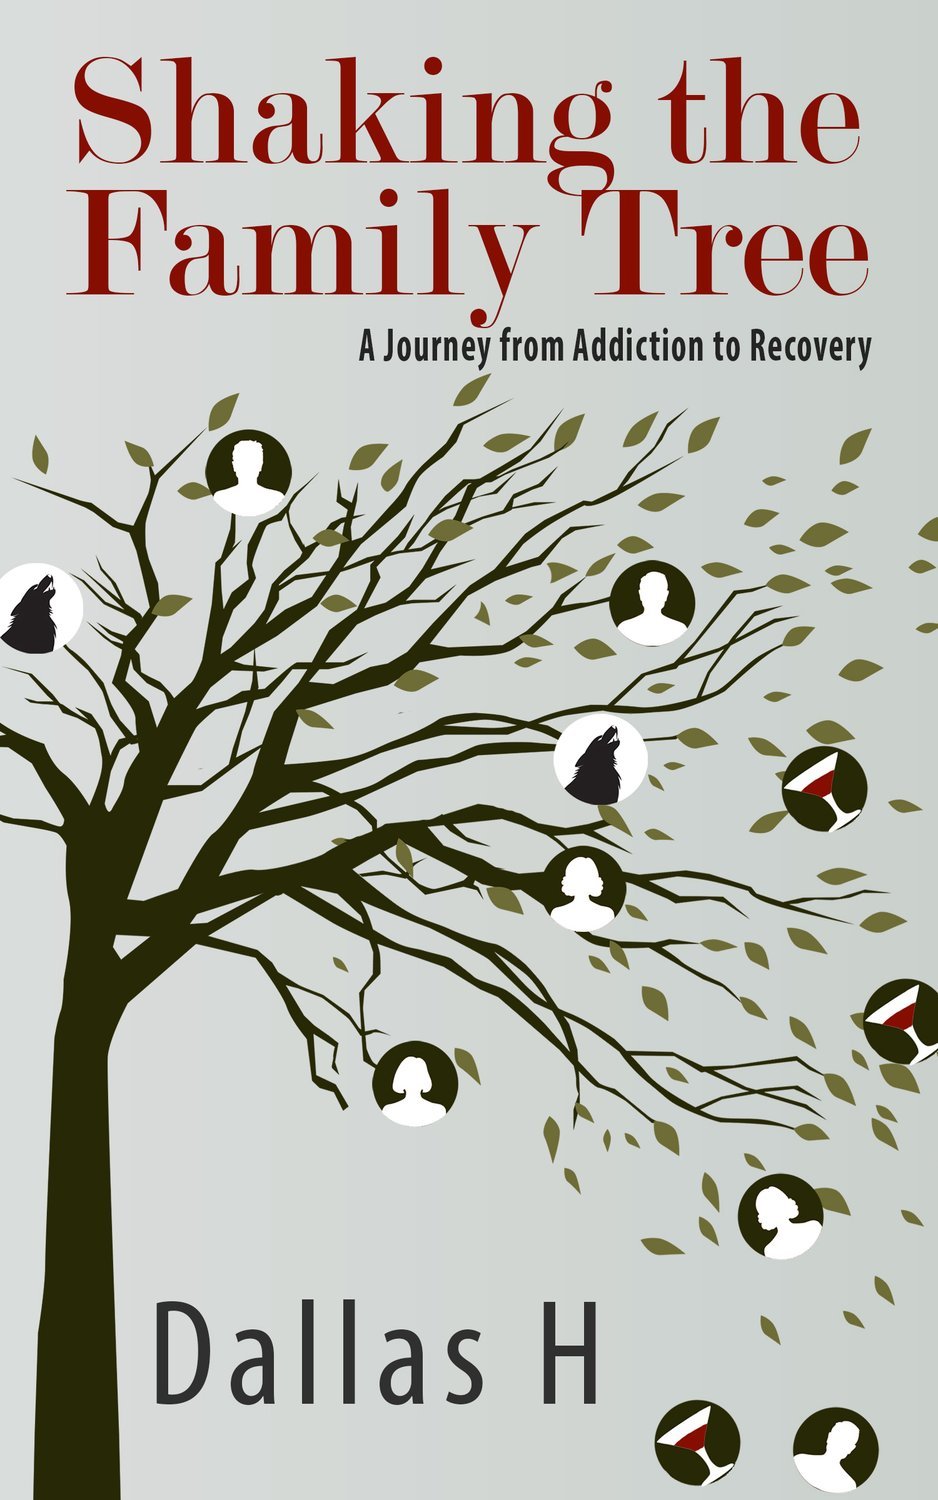 Shaking the Family Tree: A Journey from Addiction to Recovery by Dallas H